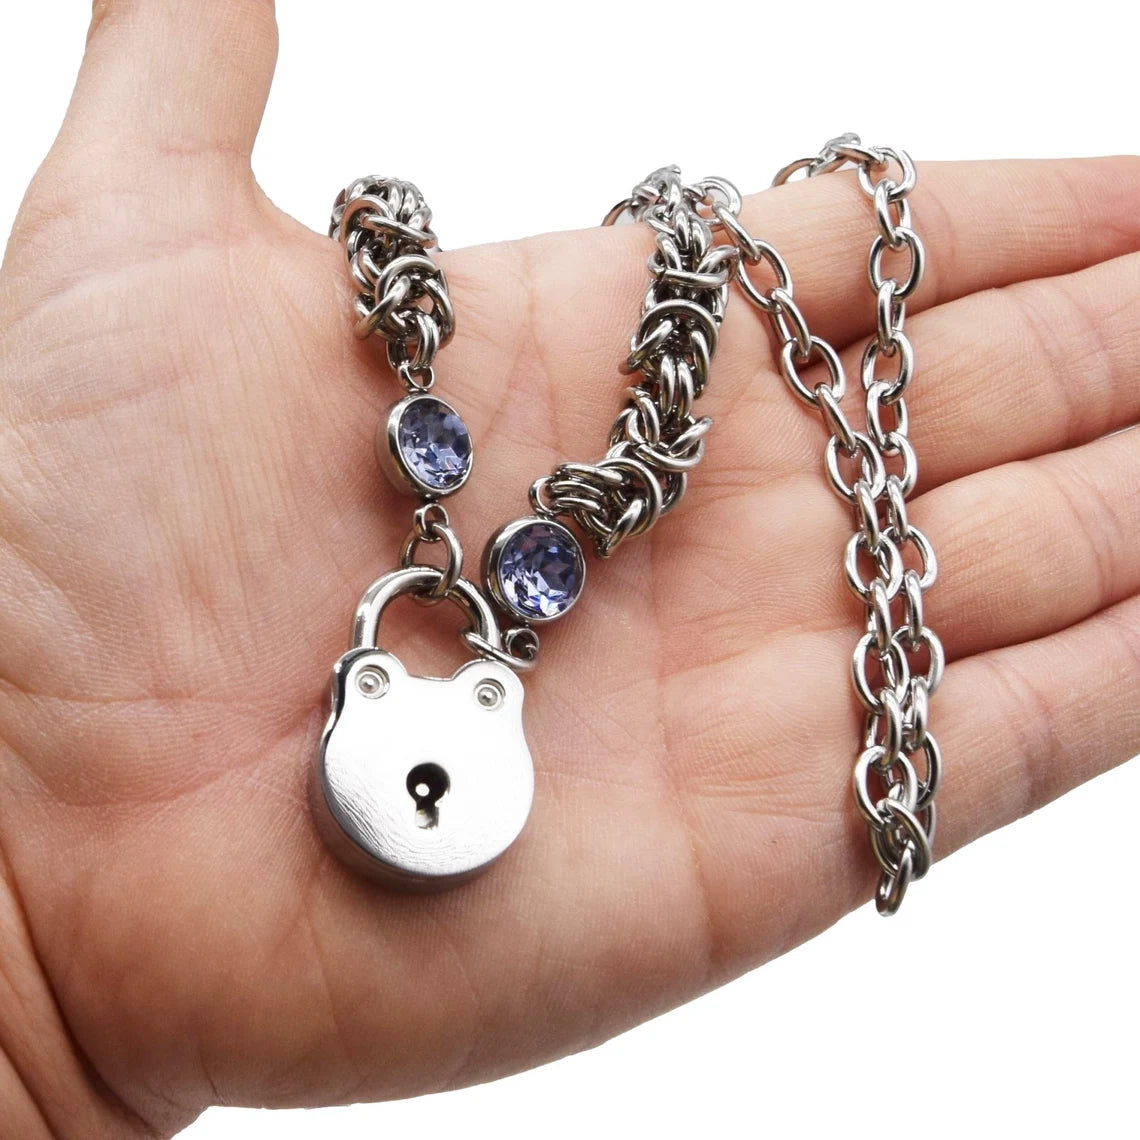 BDSM Locking Day Collar Jewelry Necklace of Lock and O ring available in solid 316L Stainless Steel or 925 sterling silver with chainmaille chain mail and light purple blue crystal cz  shown on a model's hand